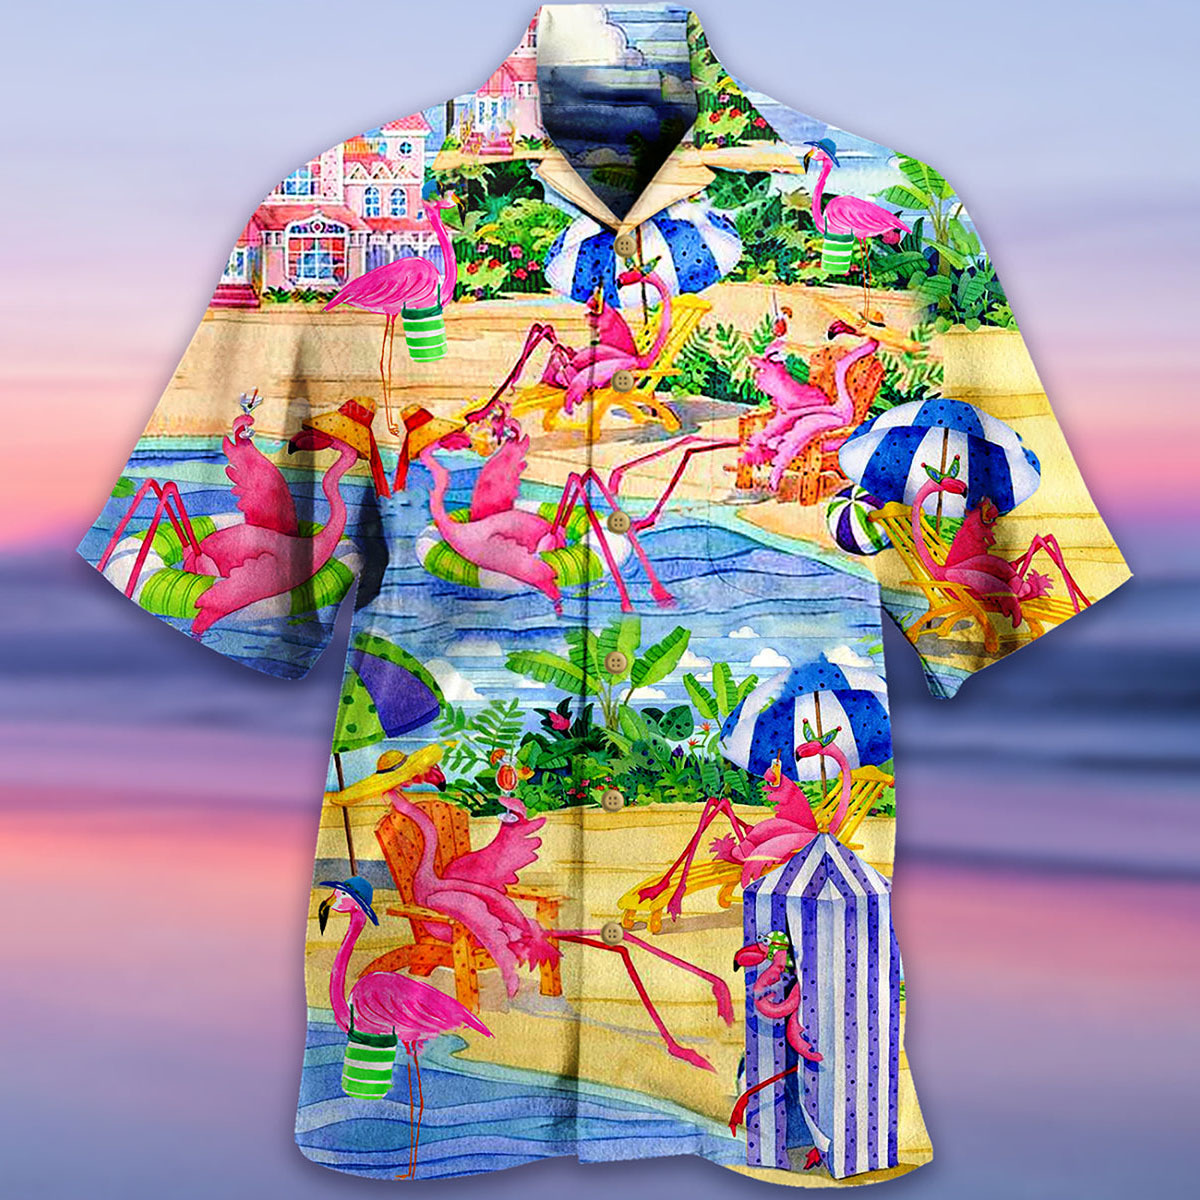 Men's Red Crowned Beach Chic Short Sleeve Shirt